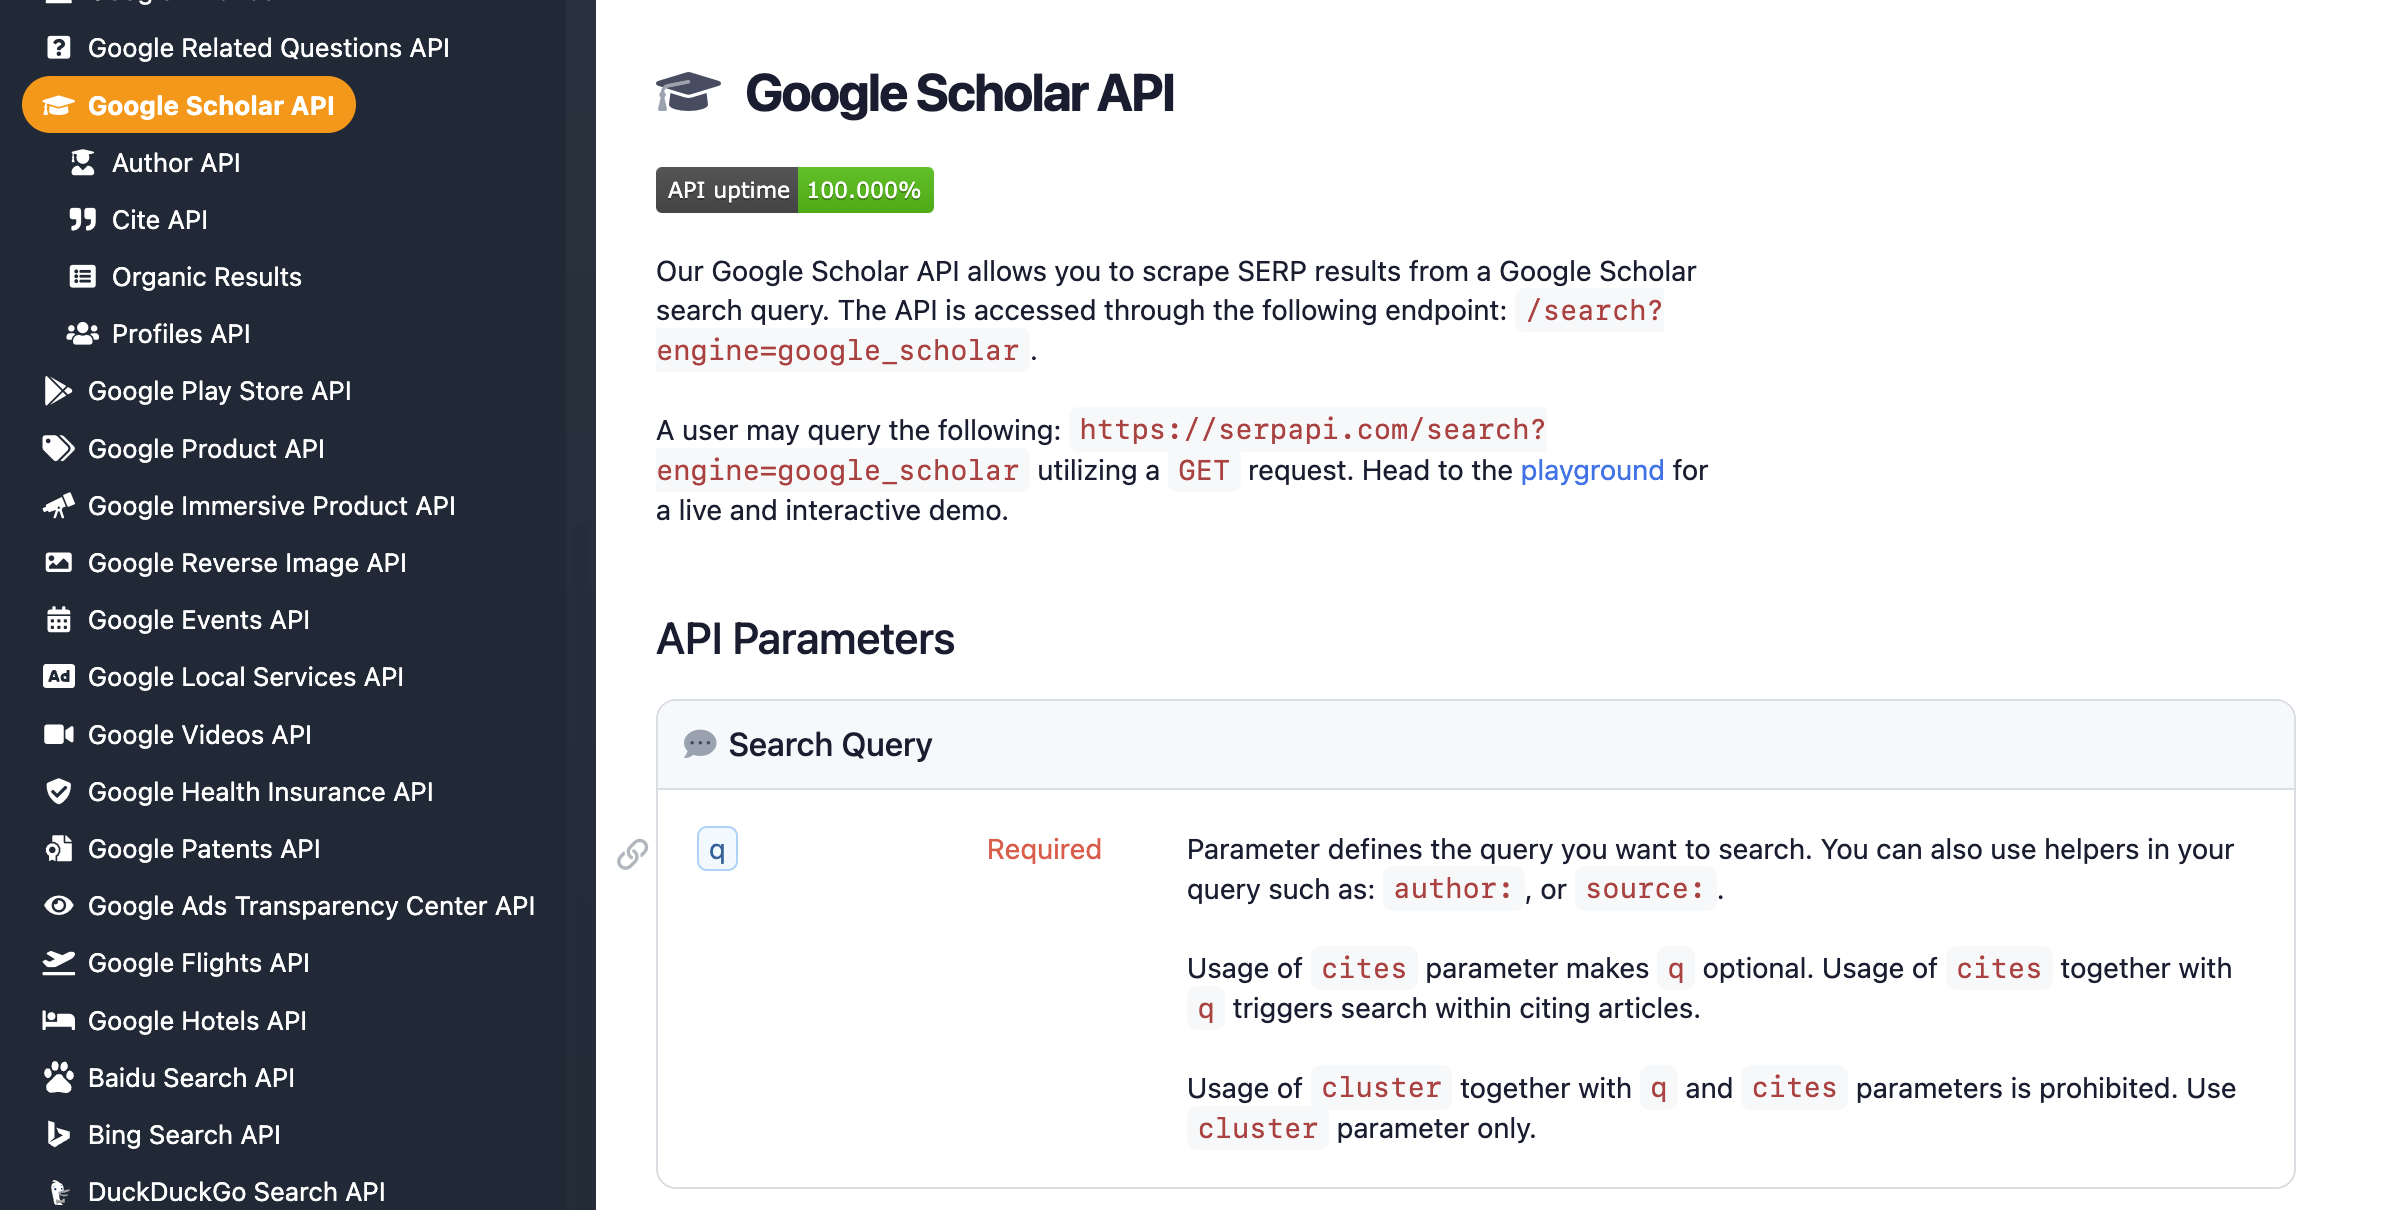 The batch solution. SerpAPI offers 4 different Google Scholar APIs. Doesn't indicate pricing though.